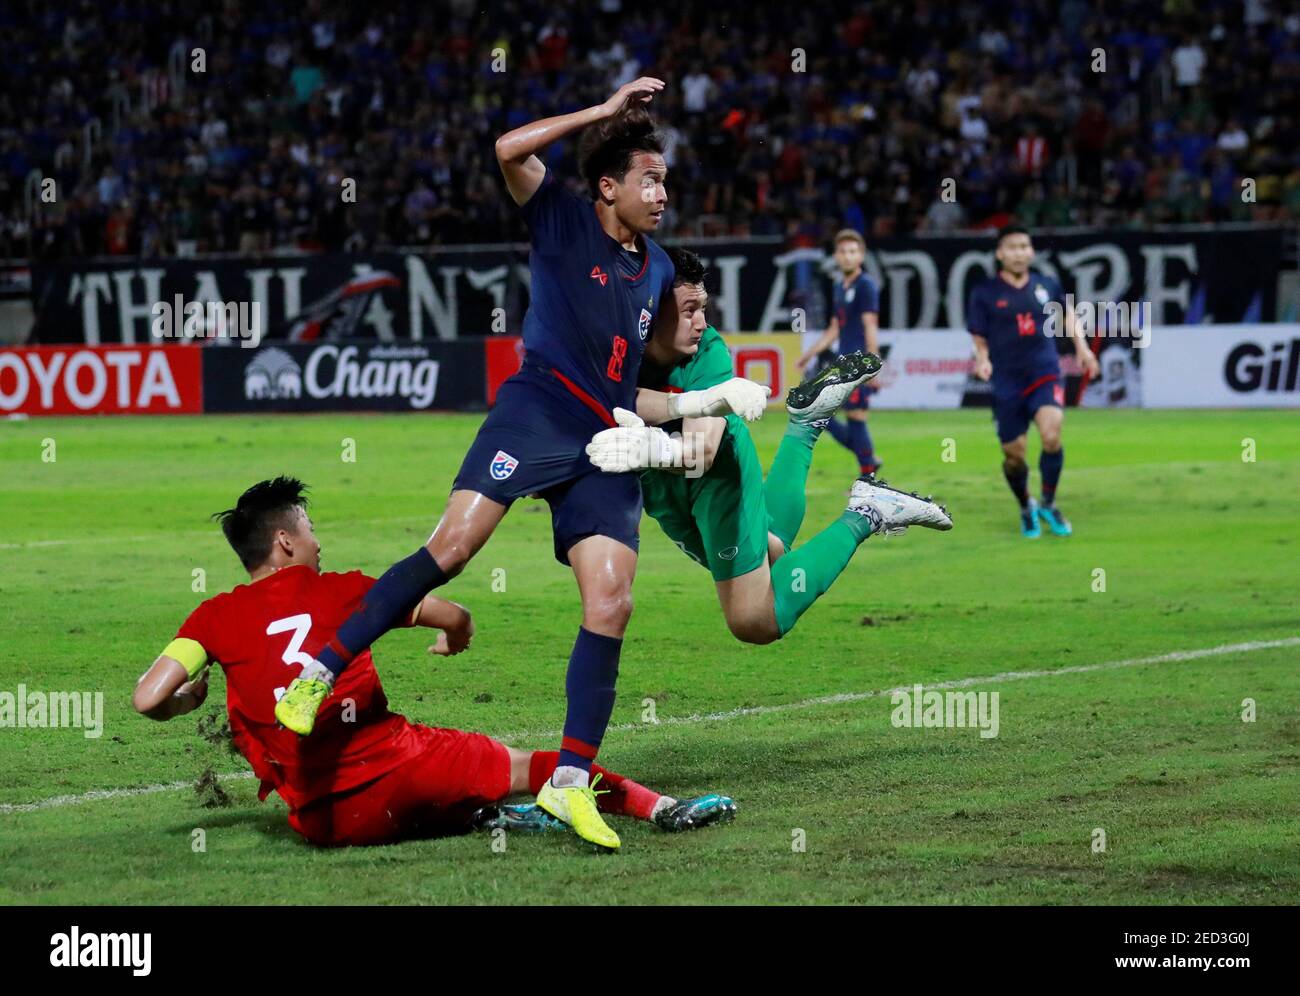 Soccer Football 22 World Cup Qualifier Thailand V Vietnam Thammasat University Main Stadium Rangsit Pathum Thani Thailand September 5 19 Thailand S Thitipan Puangchan In Action With Vietnam S Que